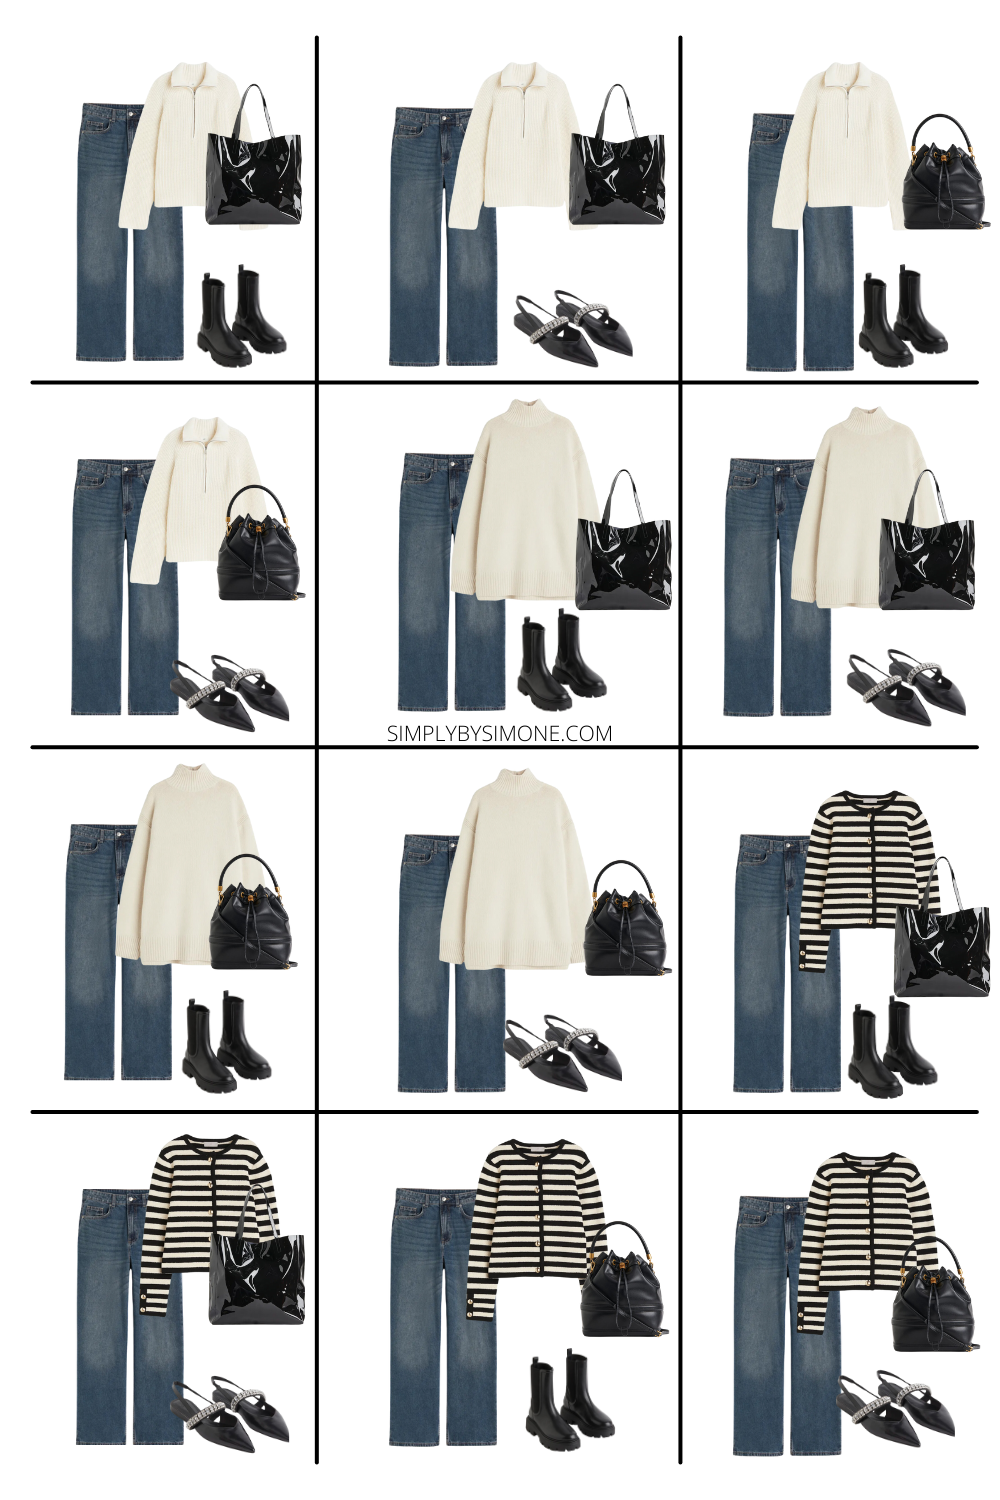 Affordable H&M Winter Capsule Wardrobe - Including 36 Outfit Ideas ...